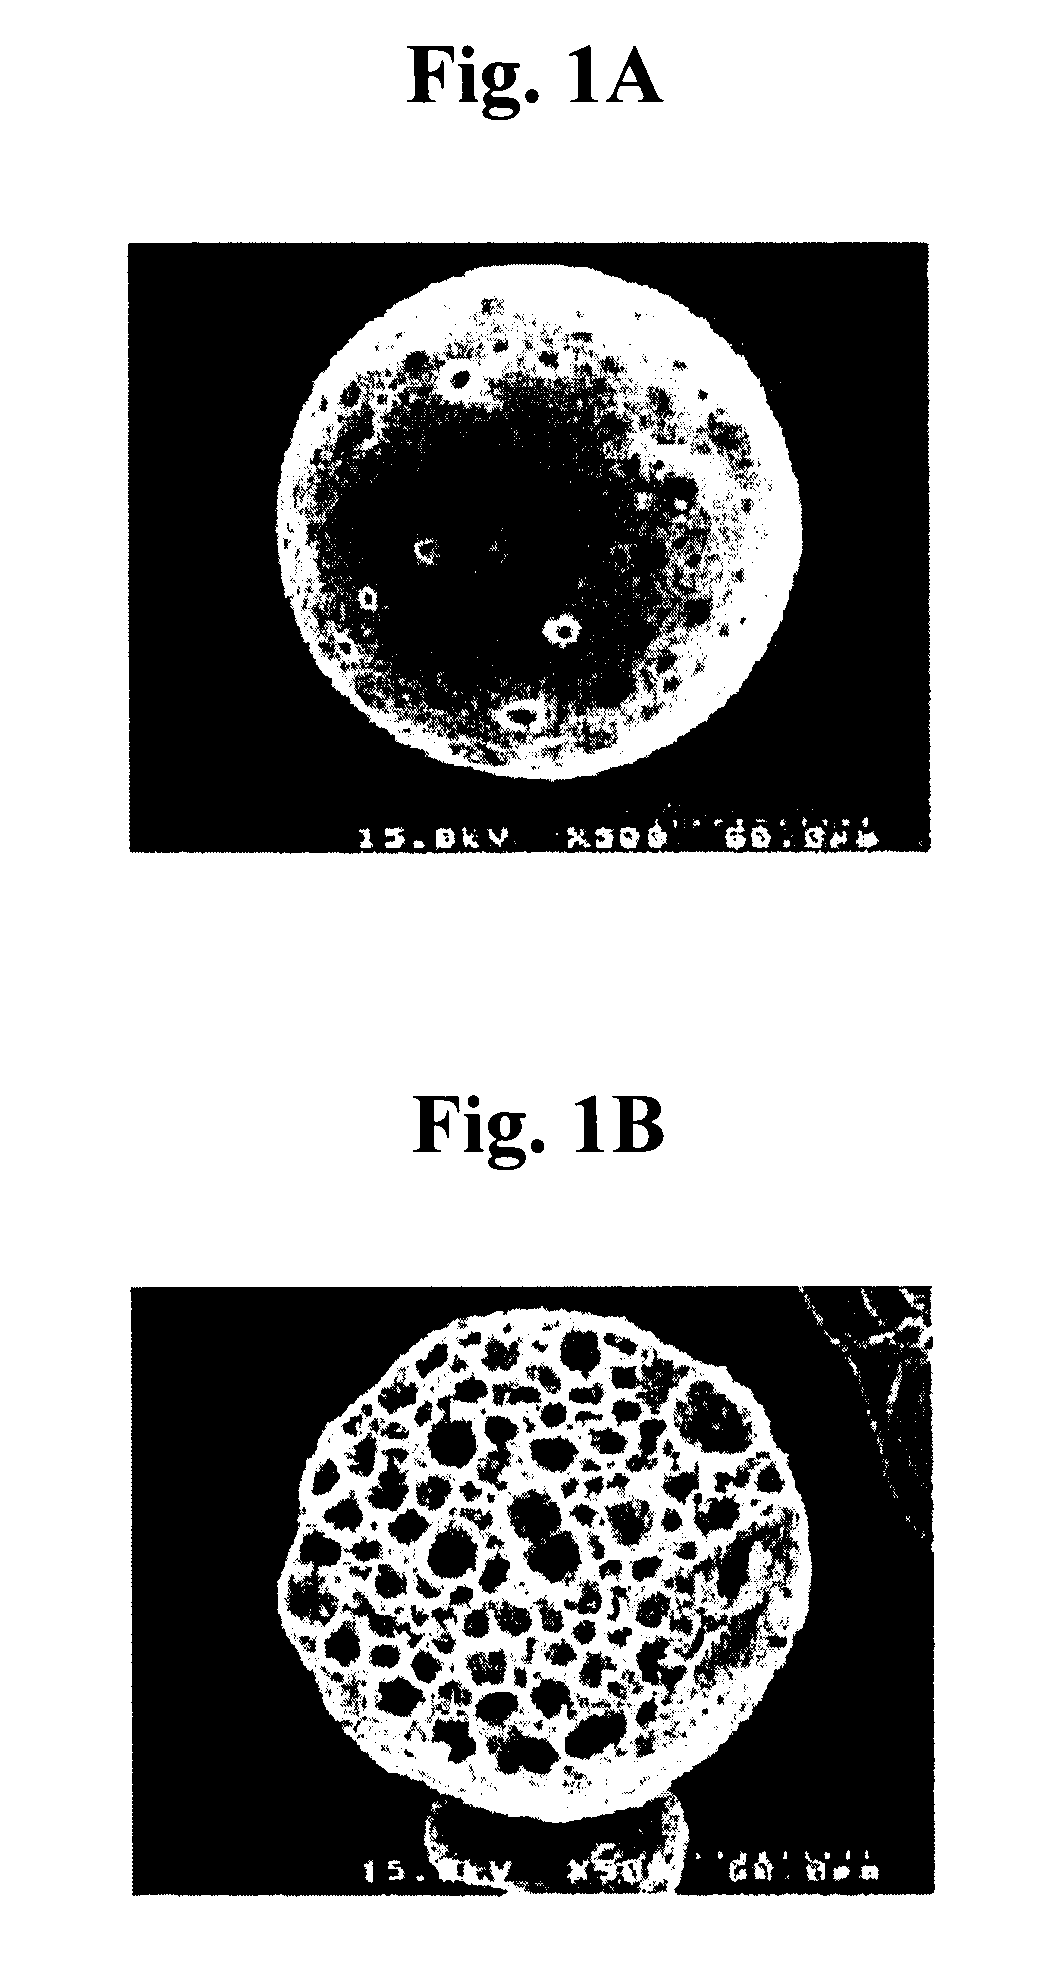 Method of preparing covered porous biodegradable polymer microspheres for sustained-release drug delivery and tissue regeneration